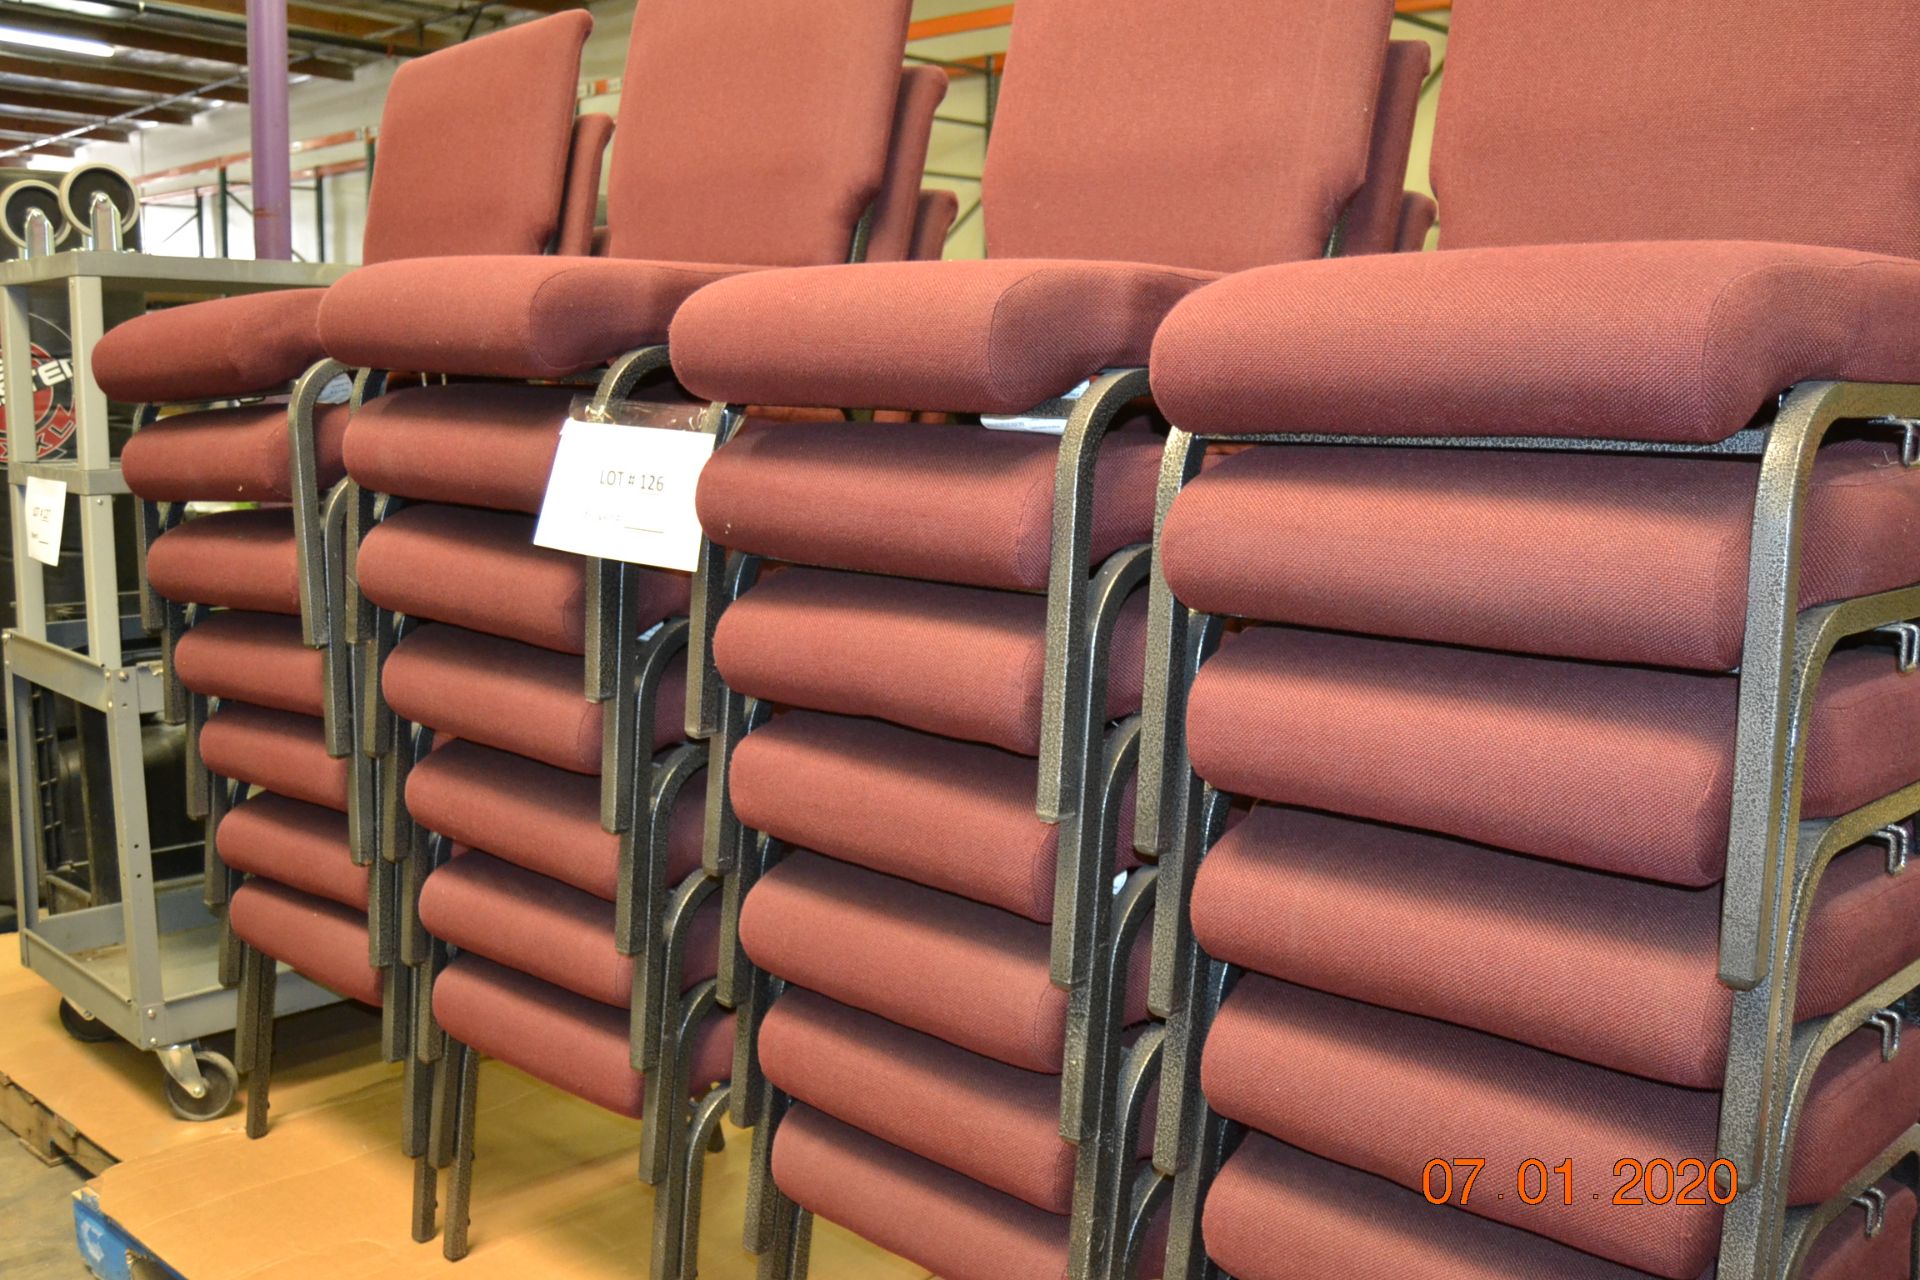 28 PADDED CHAIRS